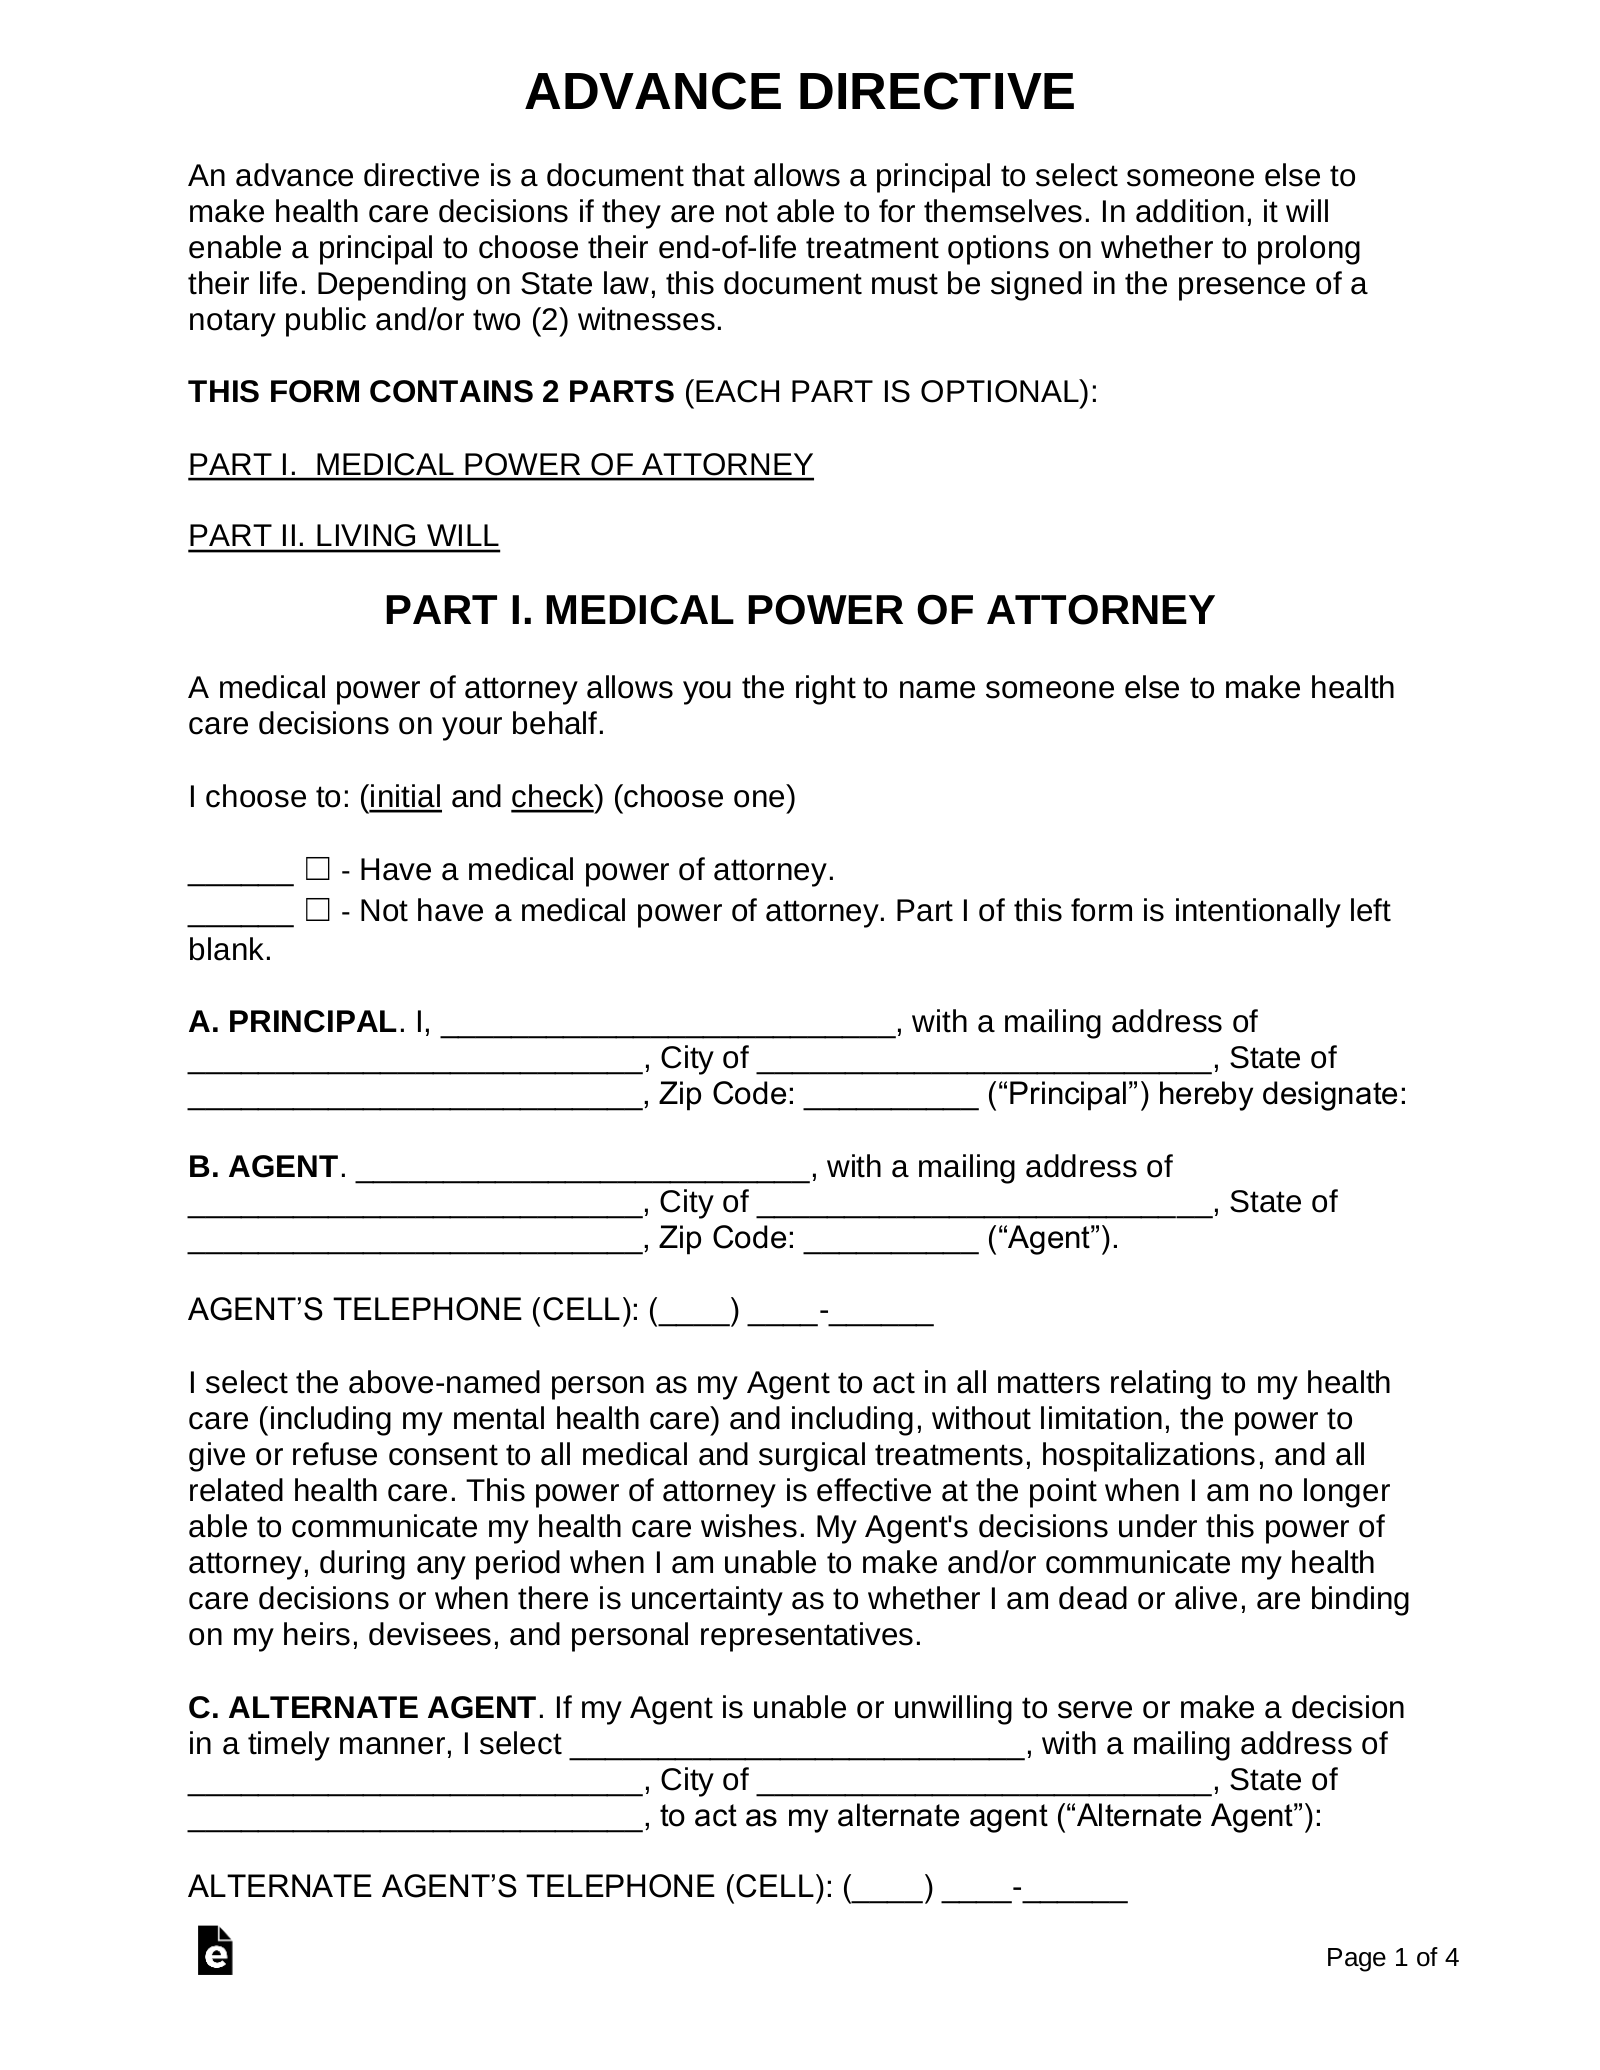 Advance Directive Form (Medical POA + Living Will)